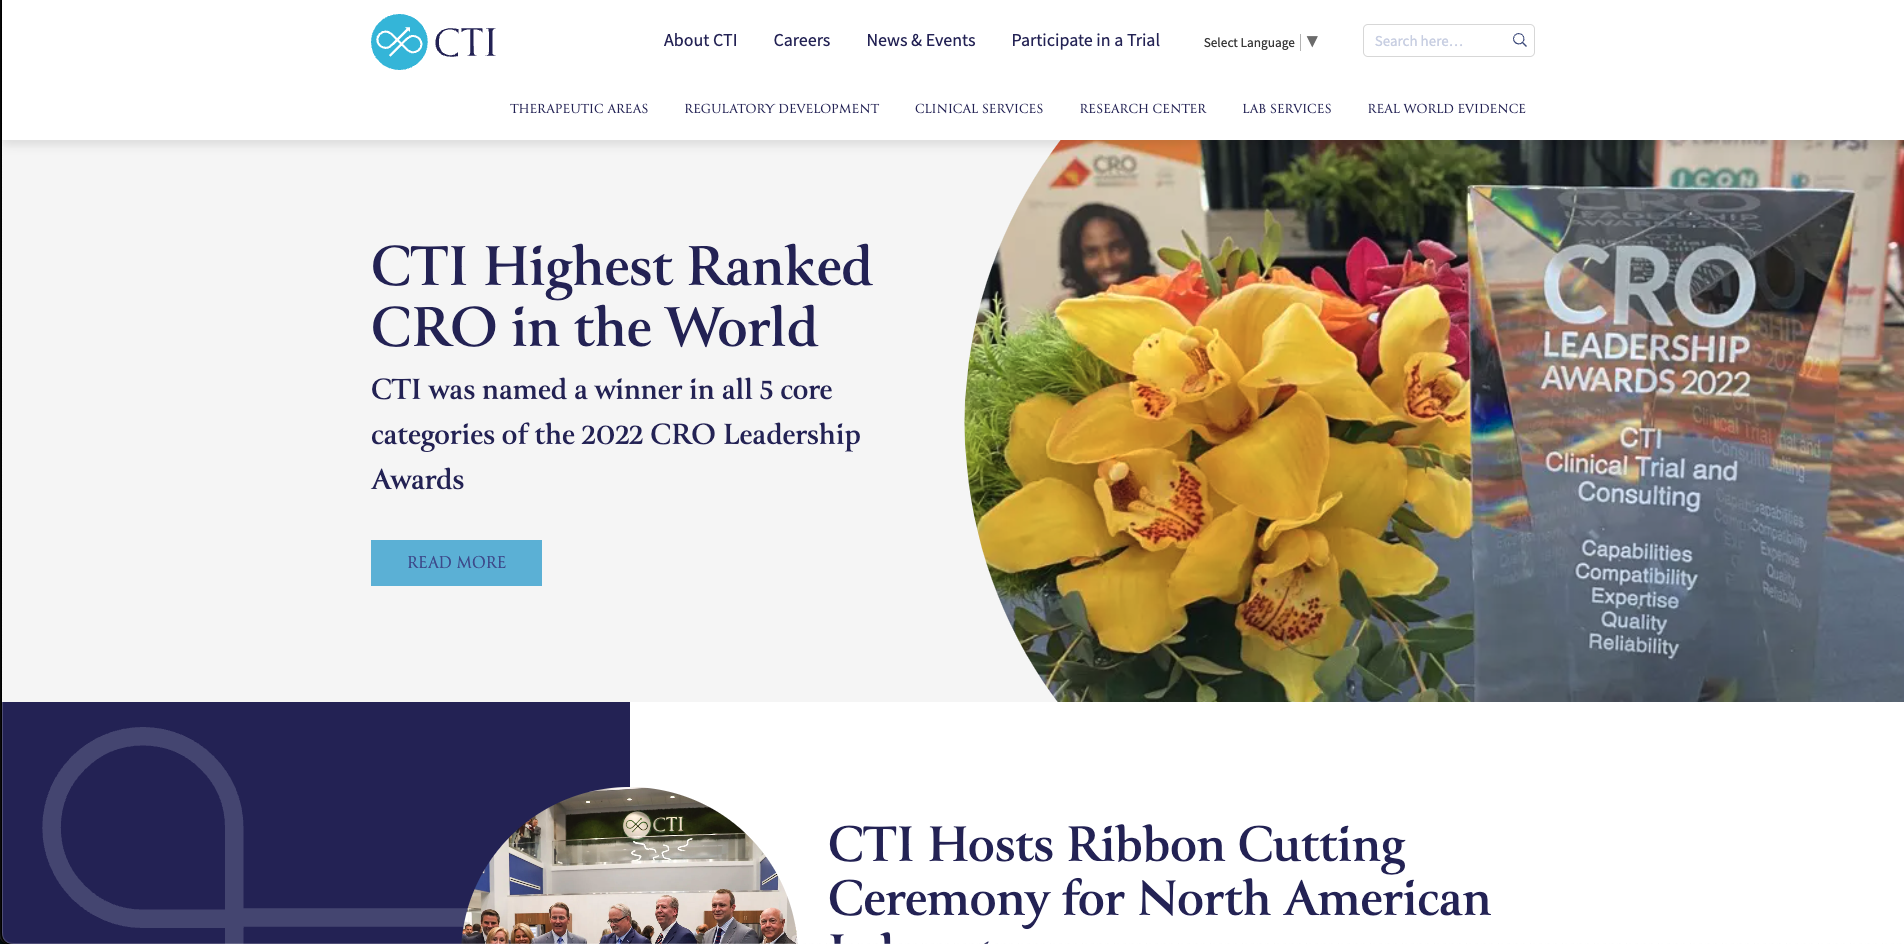 A desktop view of the CTI website homepage